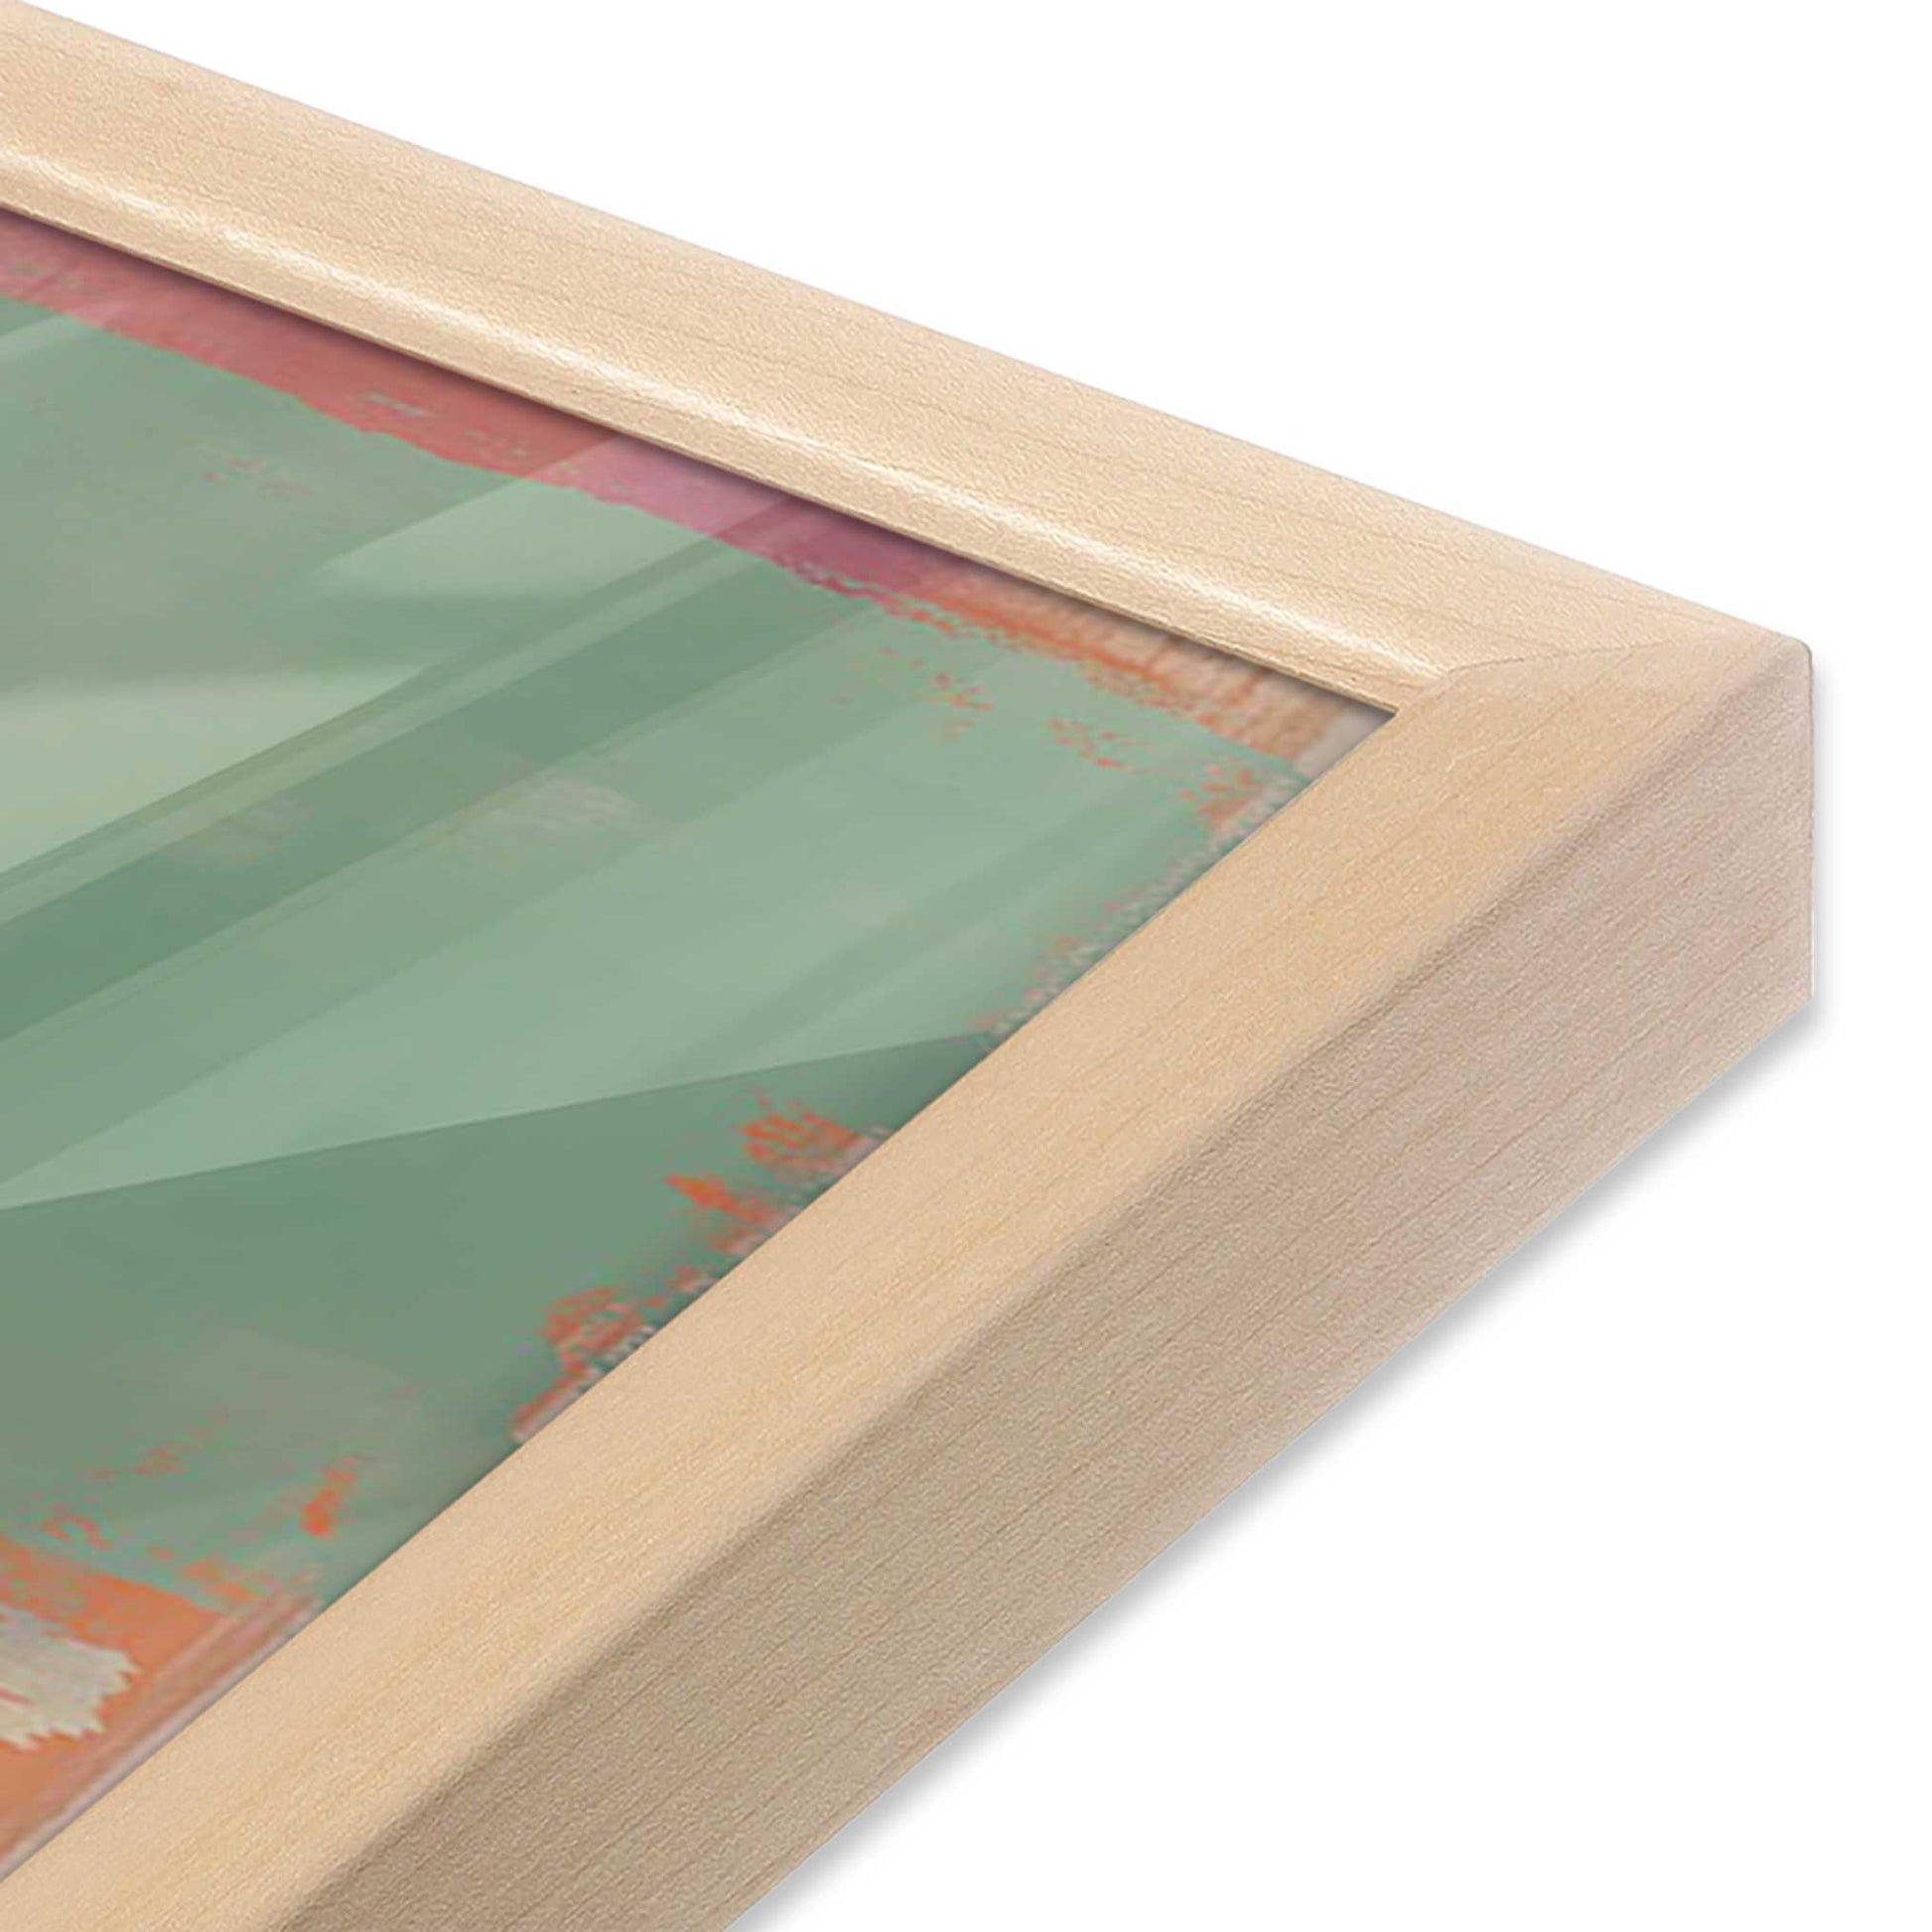 [Color:Raw Maple] Picture of art in a Raw Maple frame of the corner